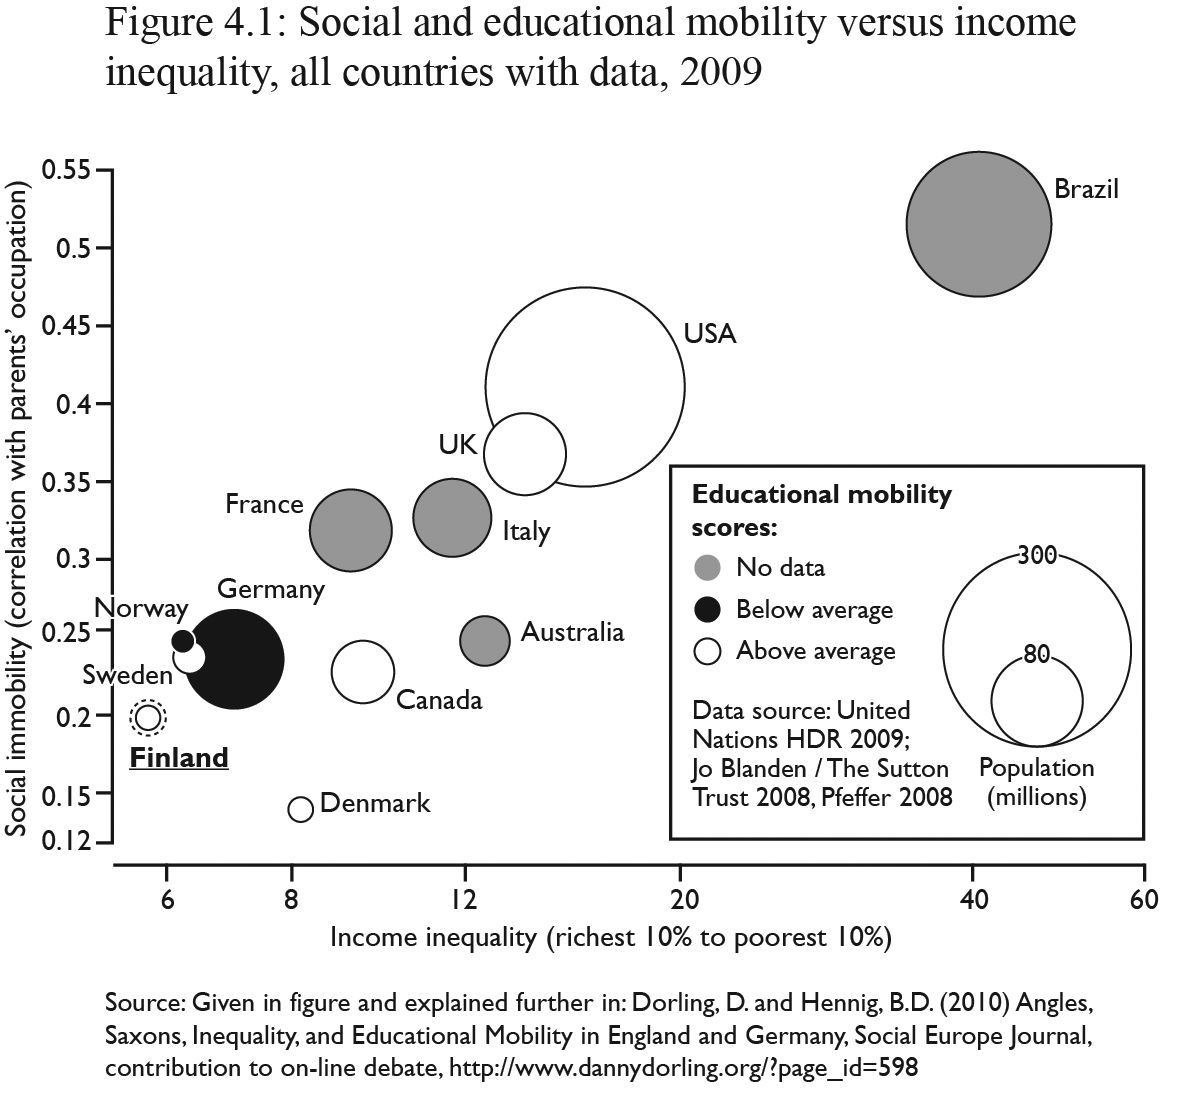 Figure 4.1: Source: Dorling, D. and Hennig, B. D. (2010) Angles, Saxons, Inequality, and Educational Mobility in England and Germany, Social Europe Journal, contribution to on-line debate, http://www.dannydorling.org/?page_id=598